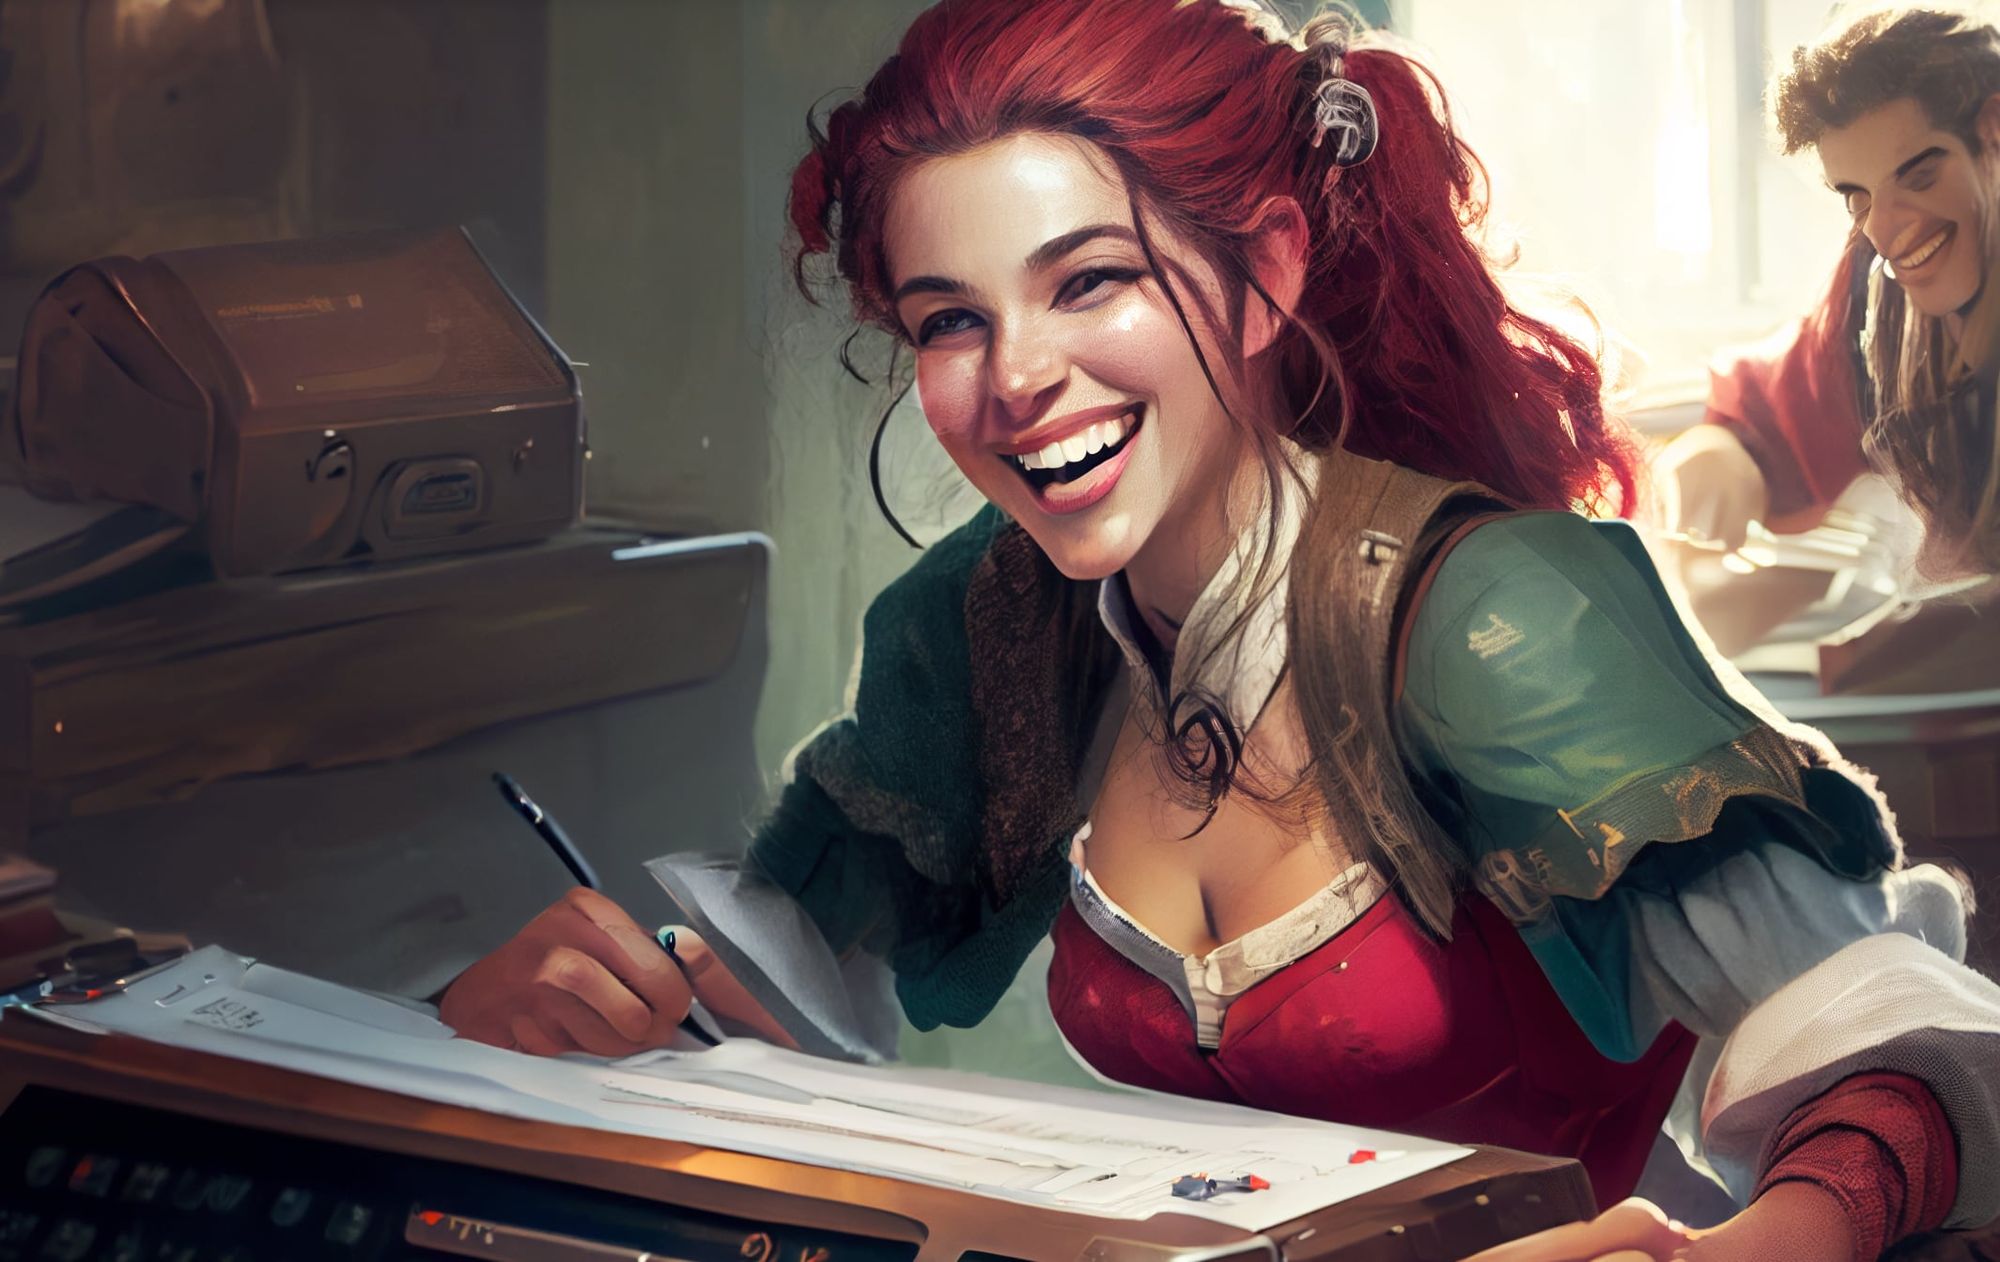 An attractive female bard, working on Google's search algorithm 